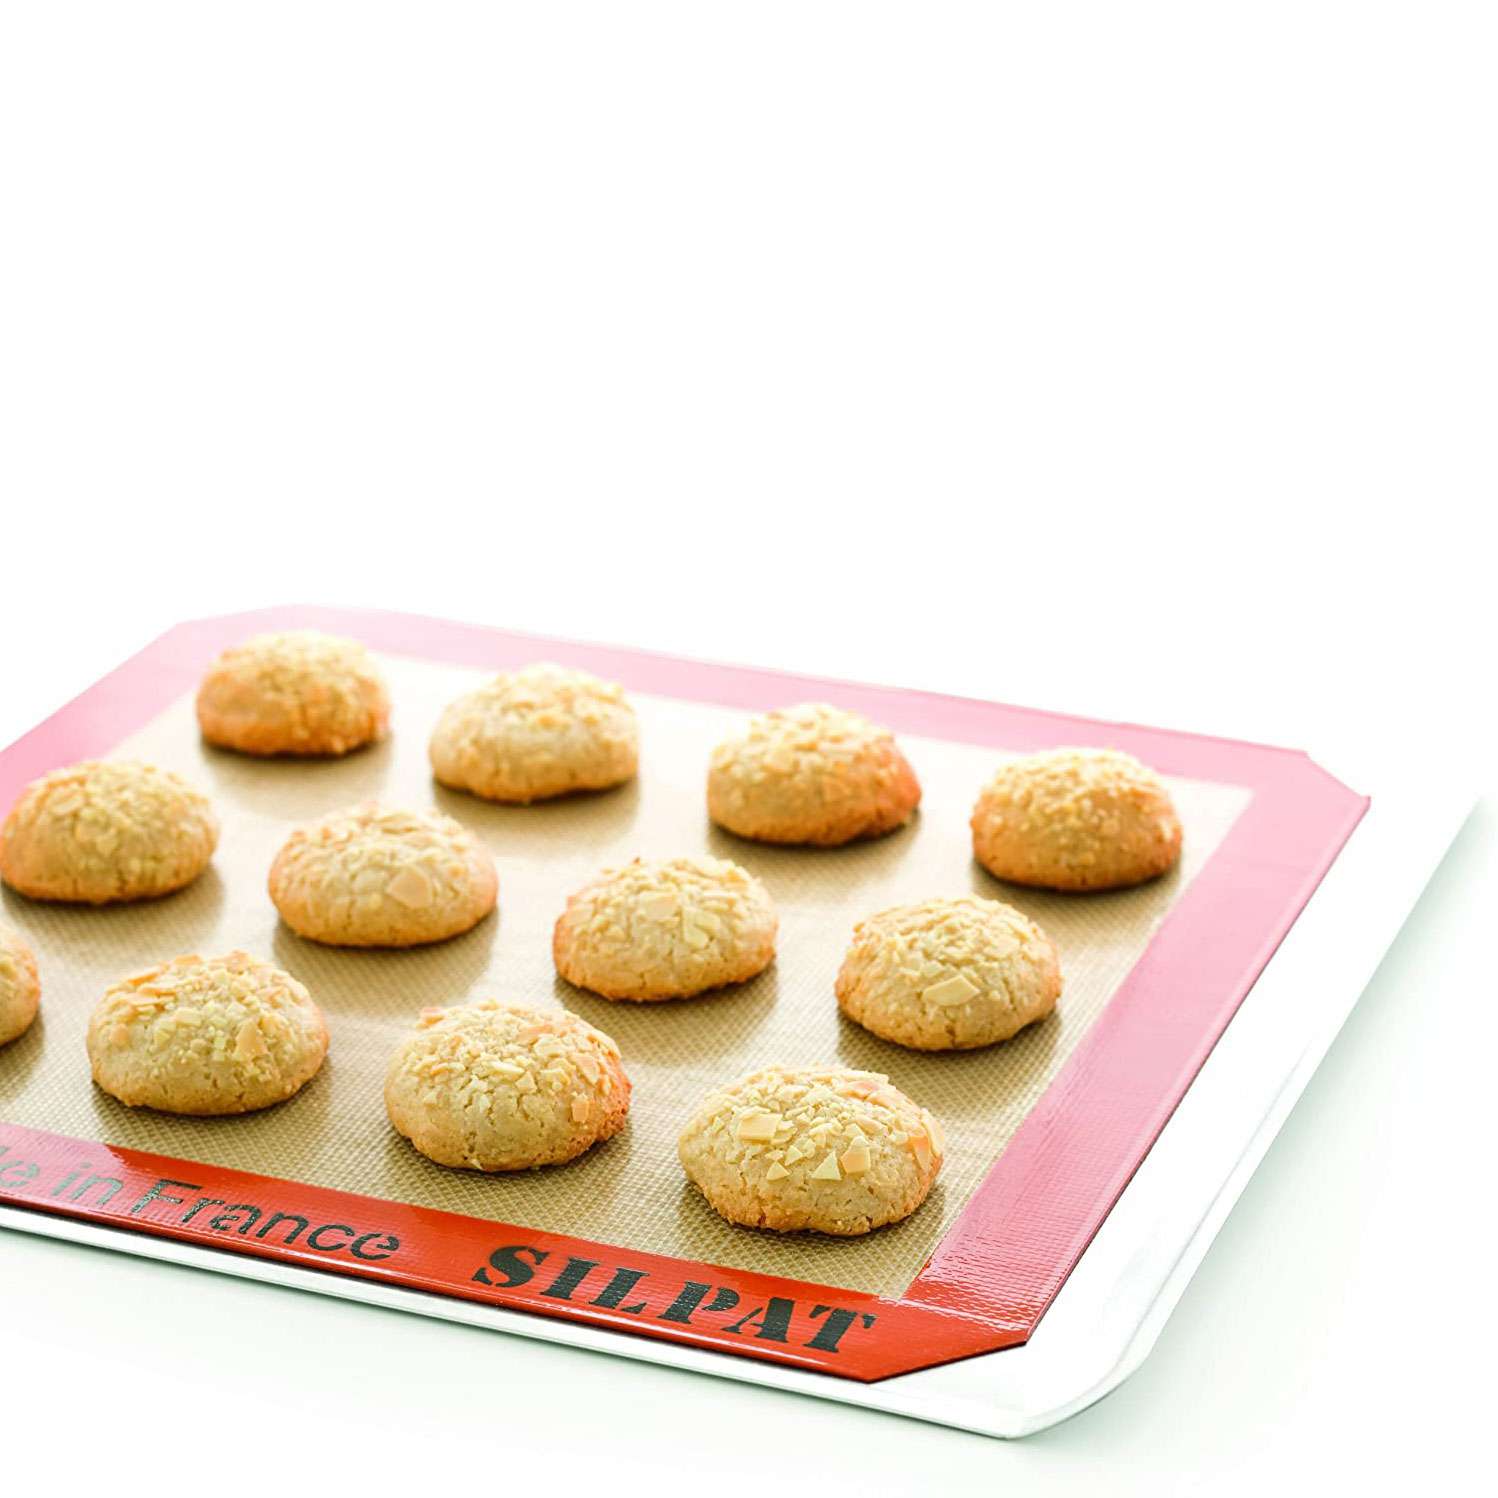 Details about   Durable Baking Mat Non-Stick Pastry Cookie Sheet Oven Baking Mat HOT 2021 